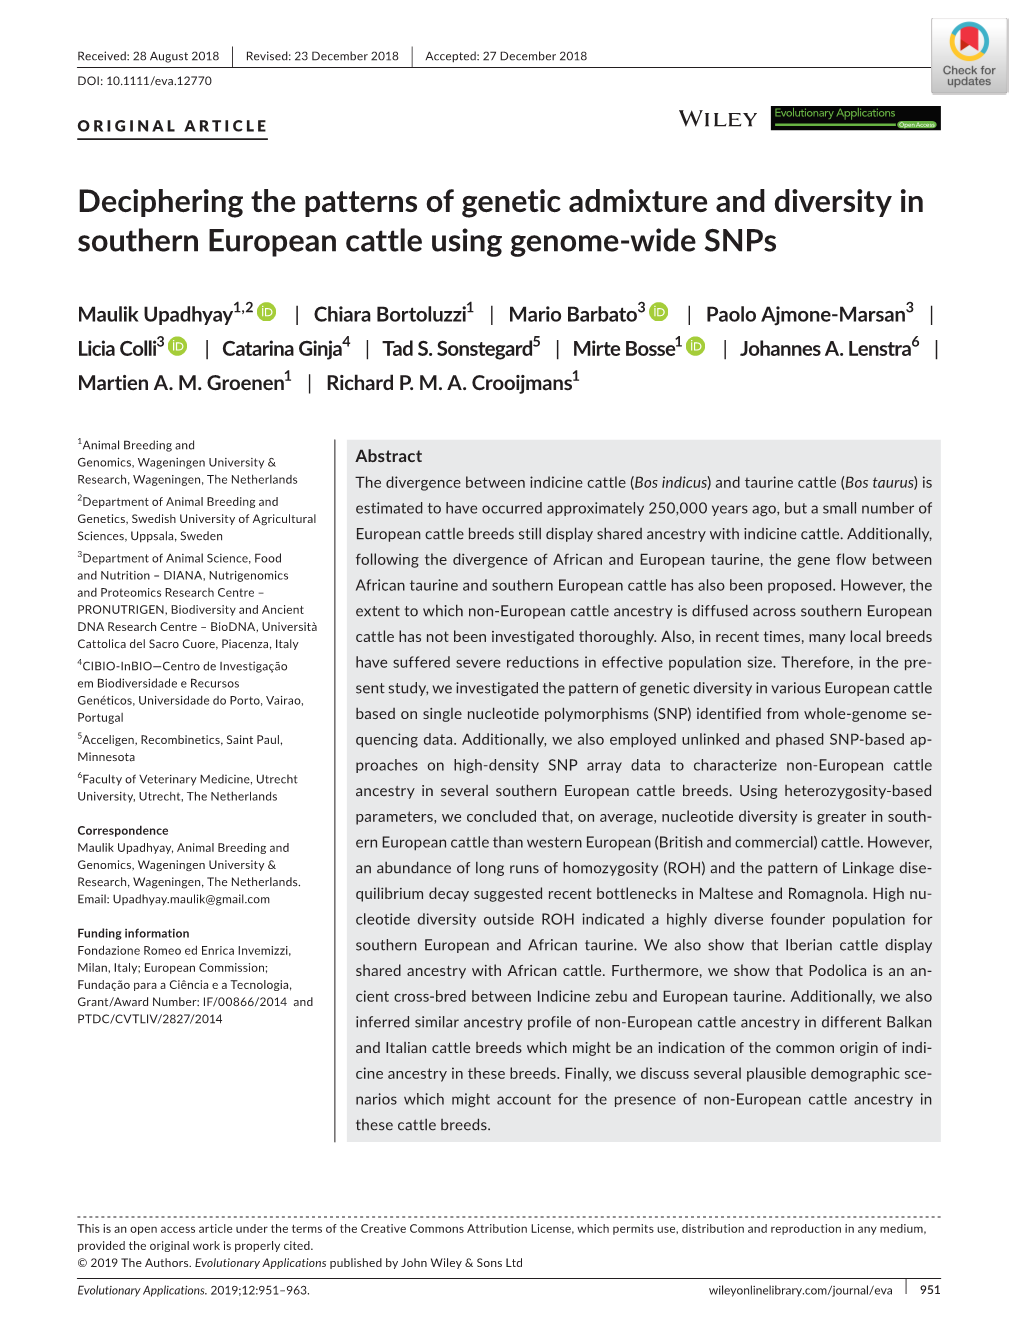 Deciphering the Patterns of Genetic Admixture and Diversity in Southern European Cattle Using Genome‐Wide Snps